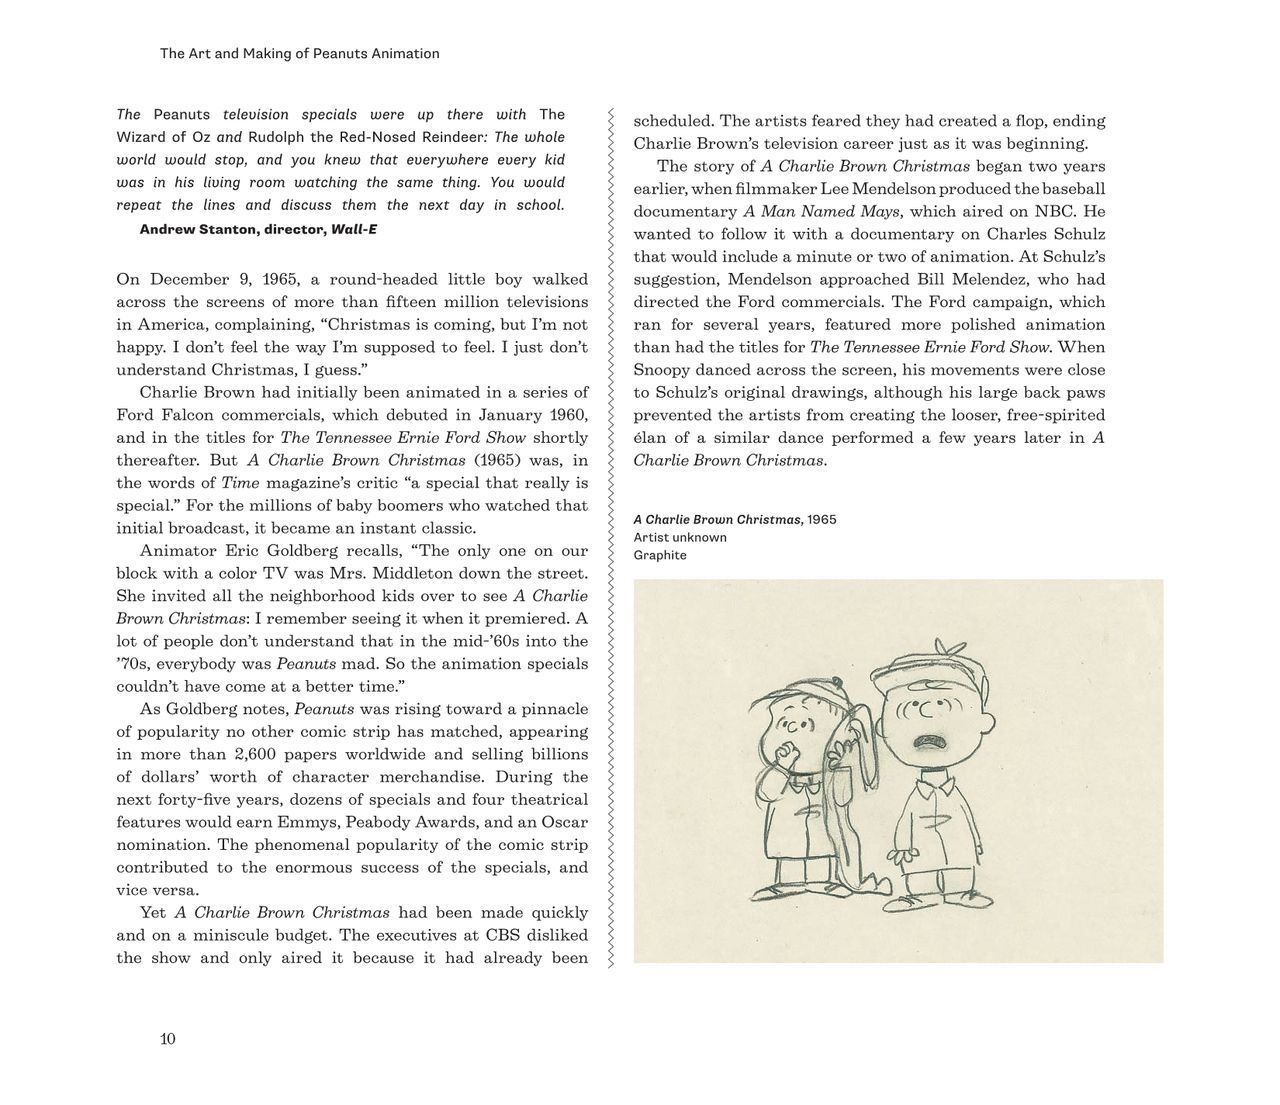 The Art and Making of Peanuts Animation 14